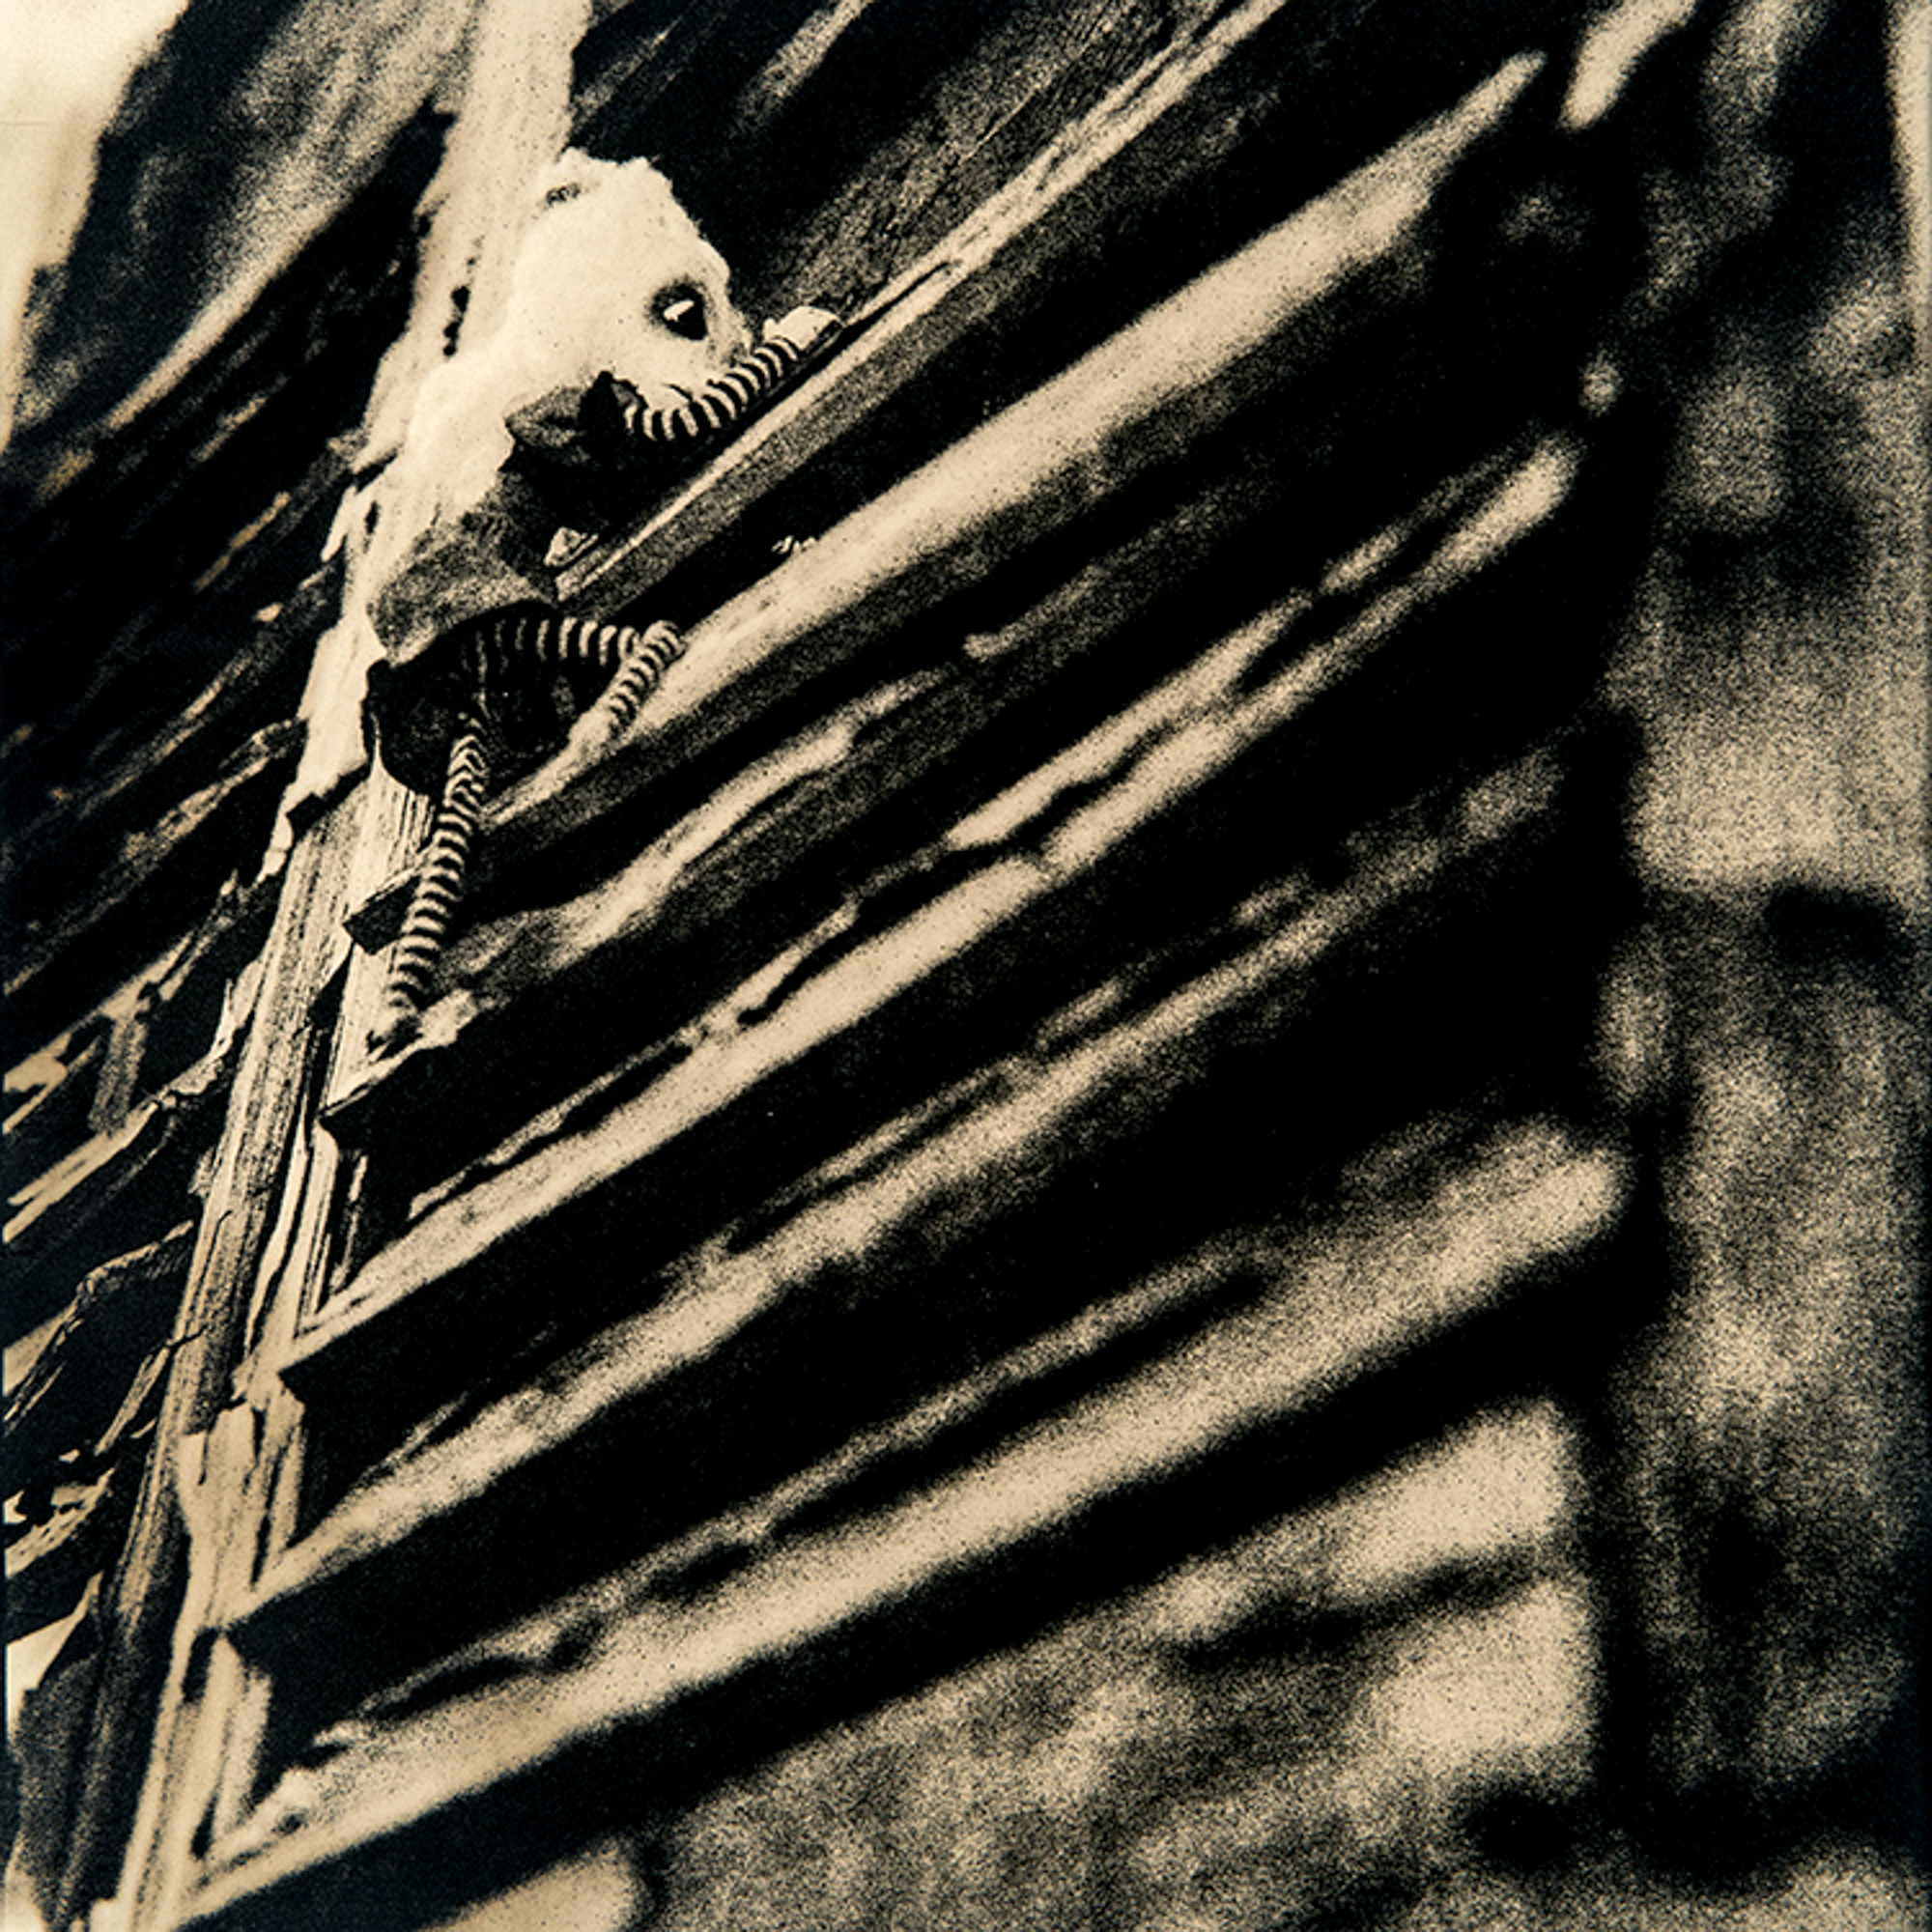   ©KatarzynaDerda    &nbsp;series "If Only" ,    photograph #5, lith print    Chicago 2009 , unique, edition of 1  